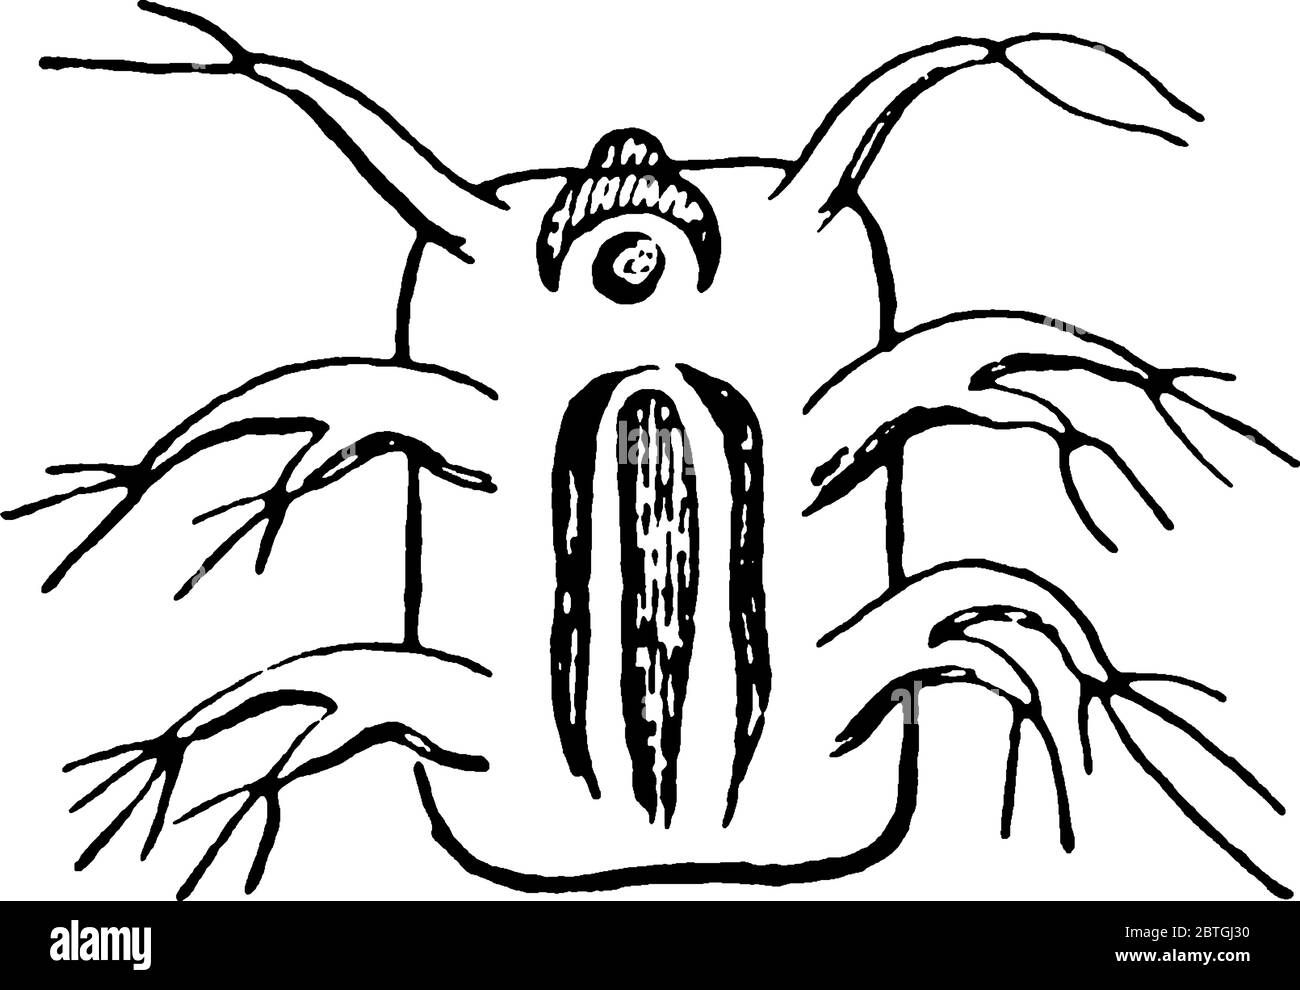 Louse is a small wingless parasitic insects in the family Pediculidae that live on the skin of mammals and birds., vintage line drawing or engraving i Stock Vector